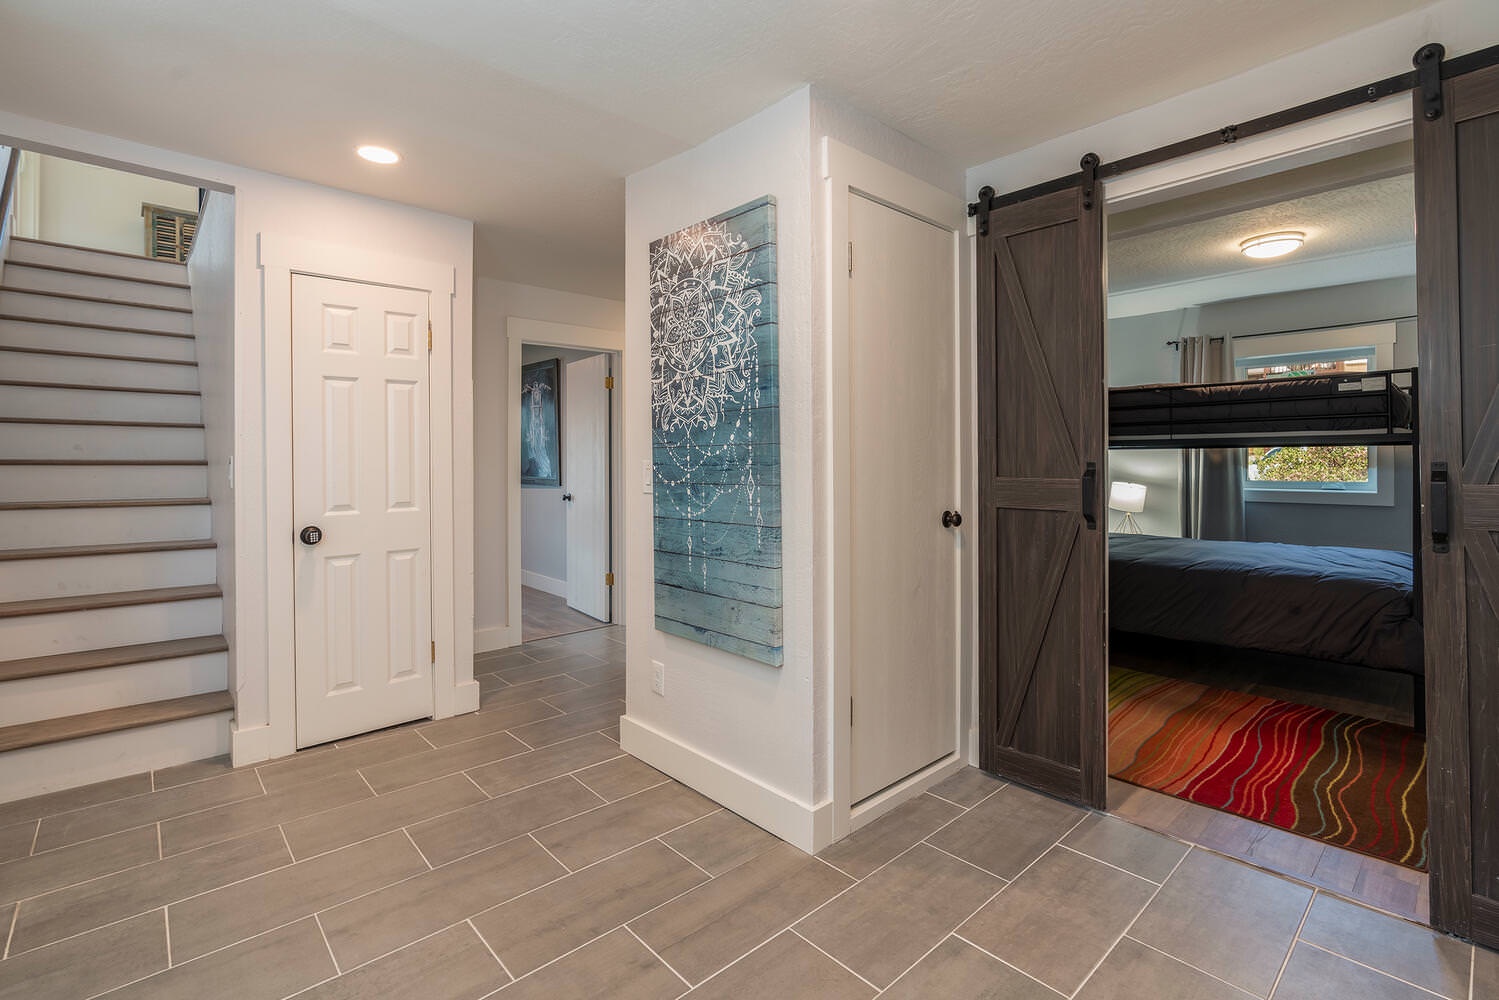 Home's entryway leads to downstairs bedroom space